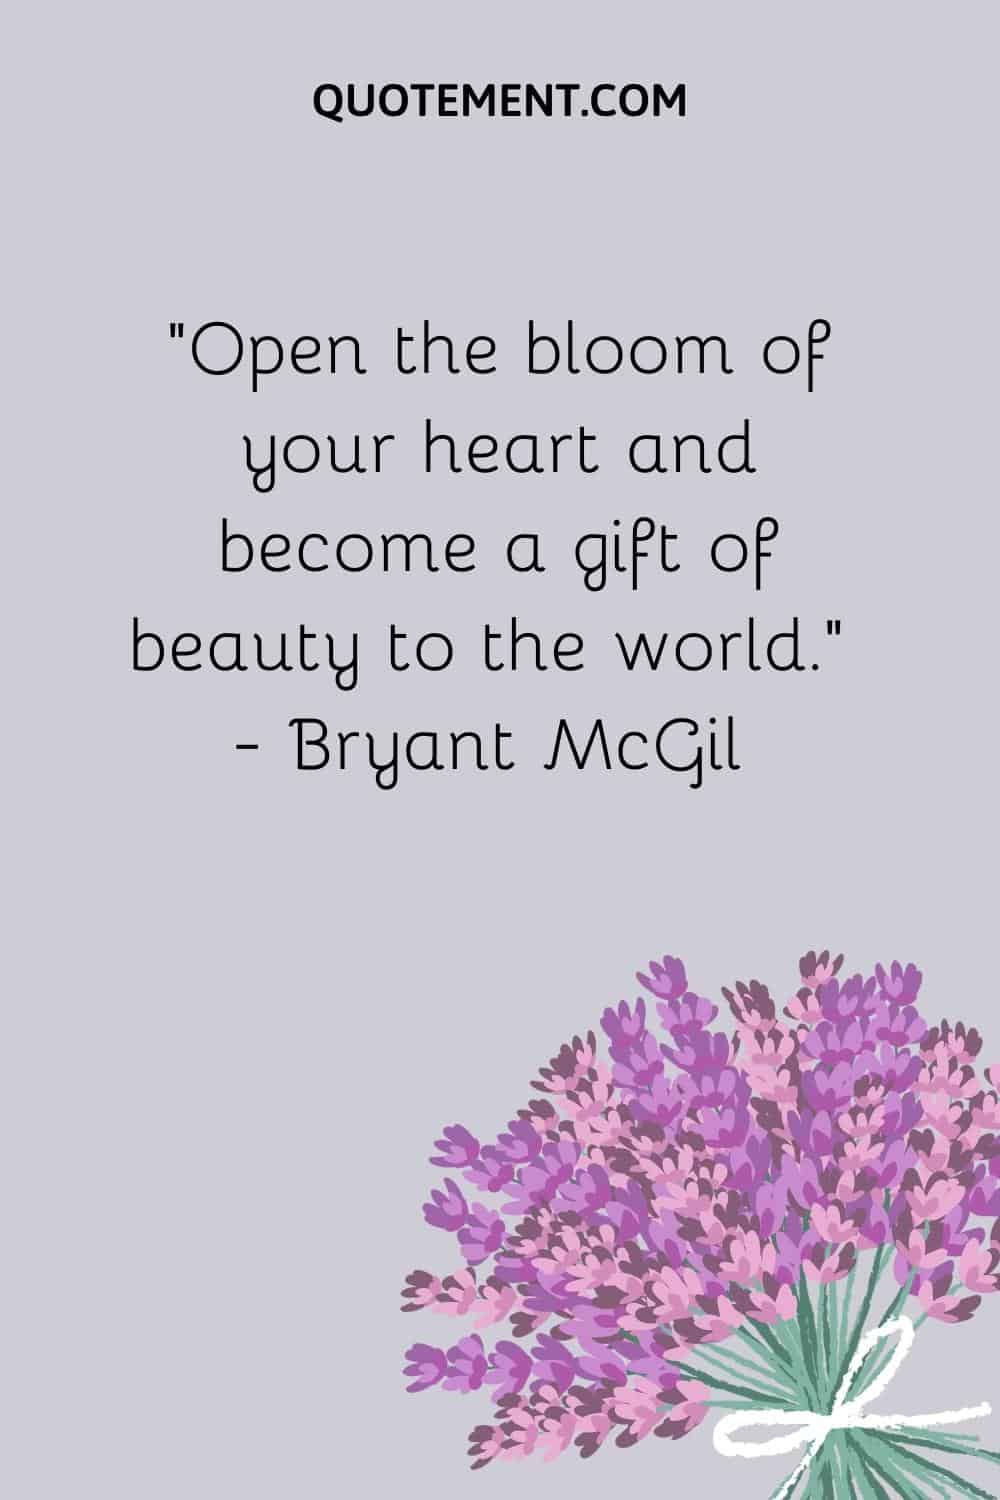 “Open the bloom of your heart and become a gift of beauty to the world.” — Bryant McGill